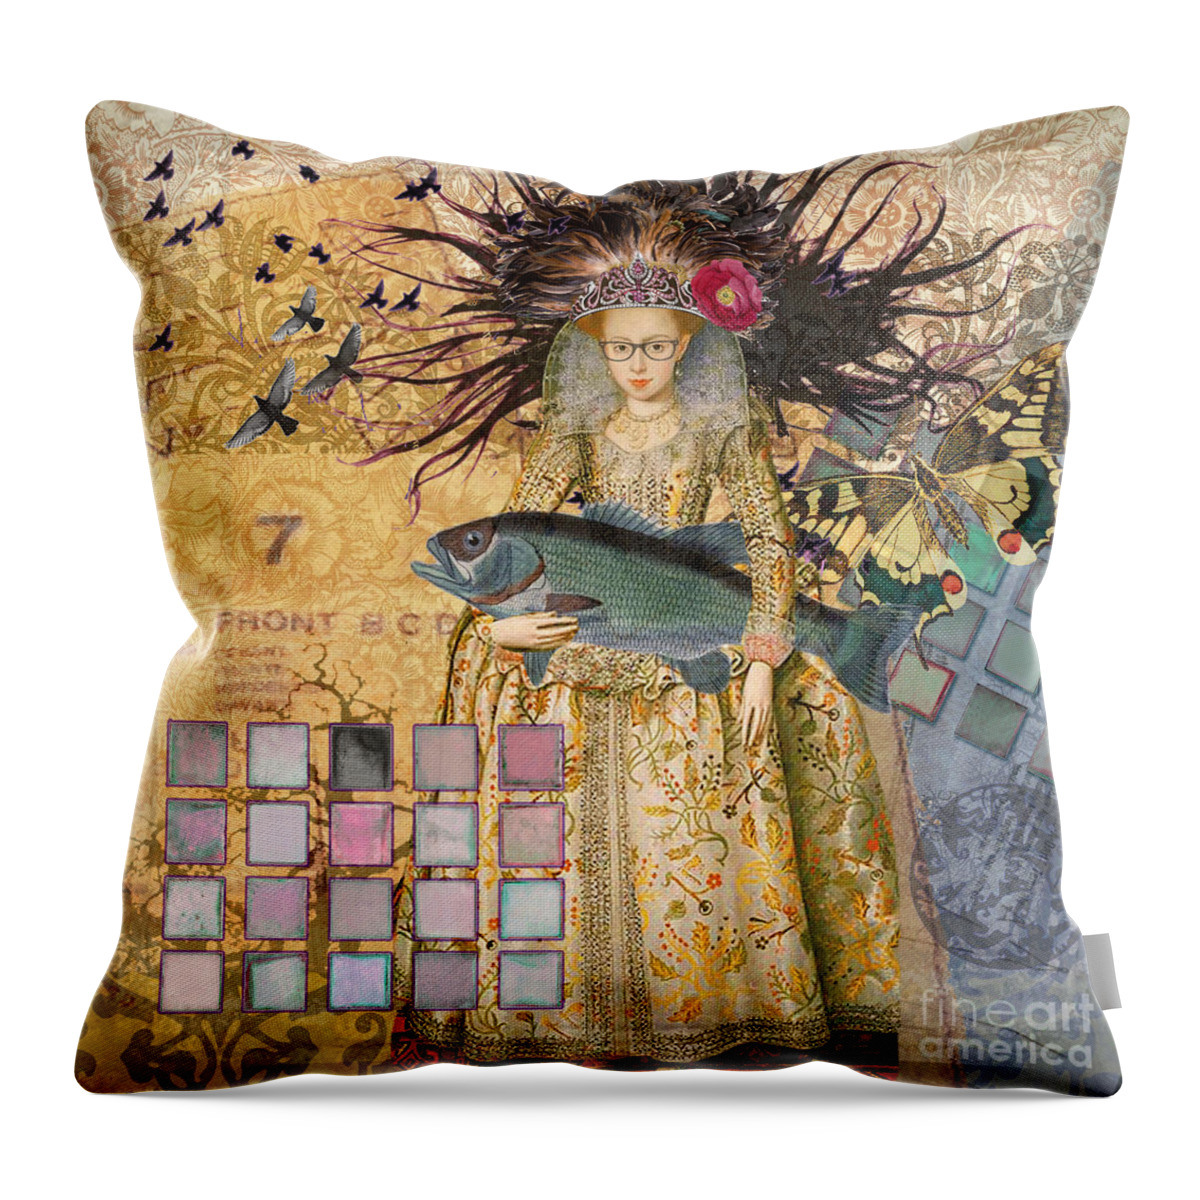 Whimsical Pisces Woman Renaissance fishing Gothic Throw Pillow by